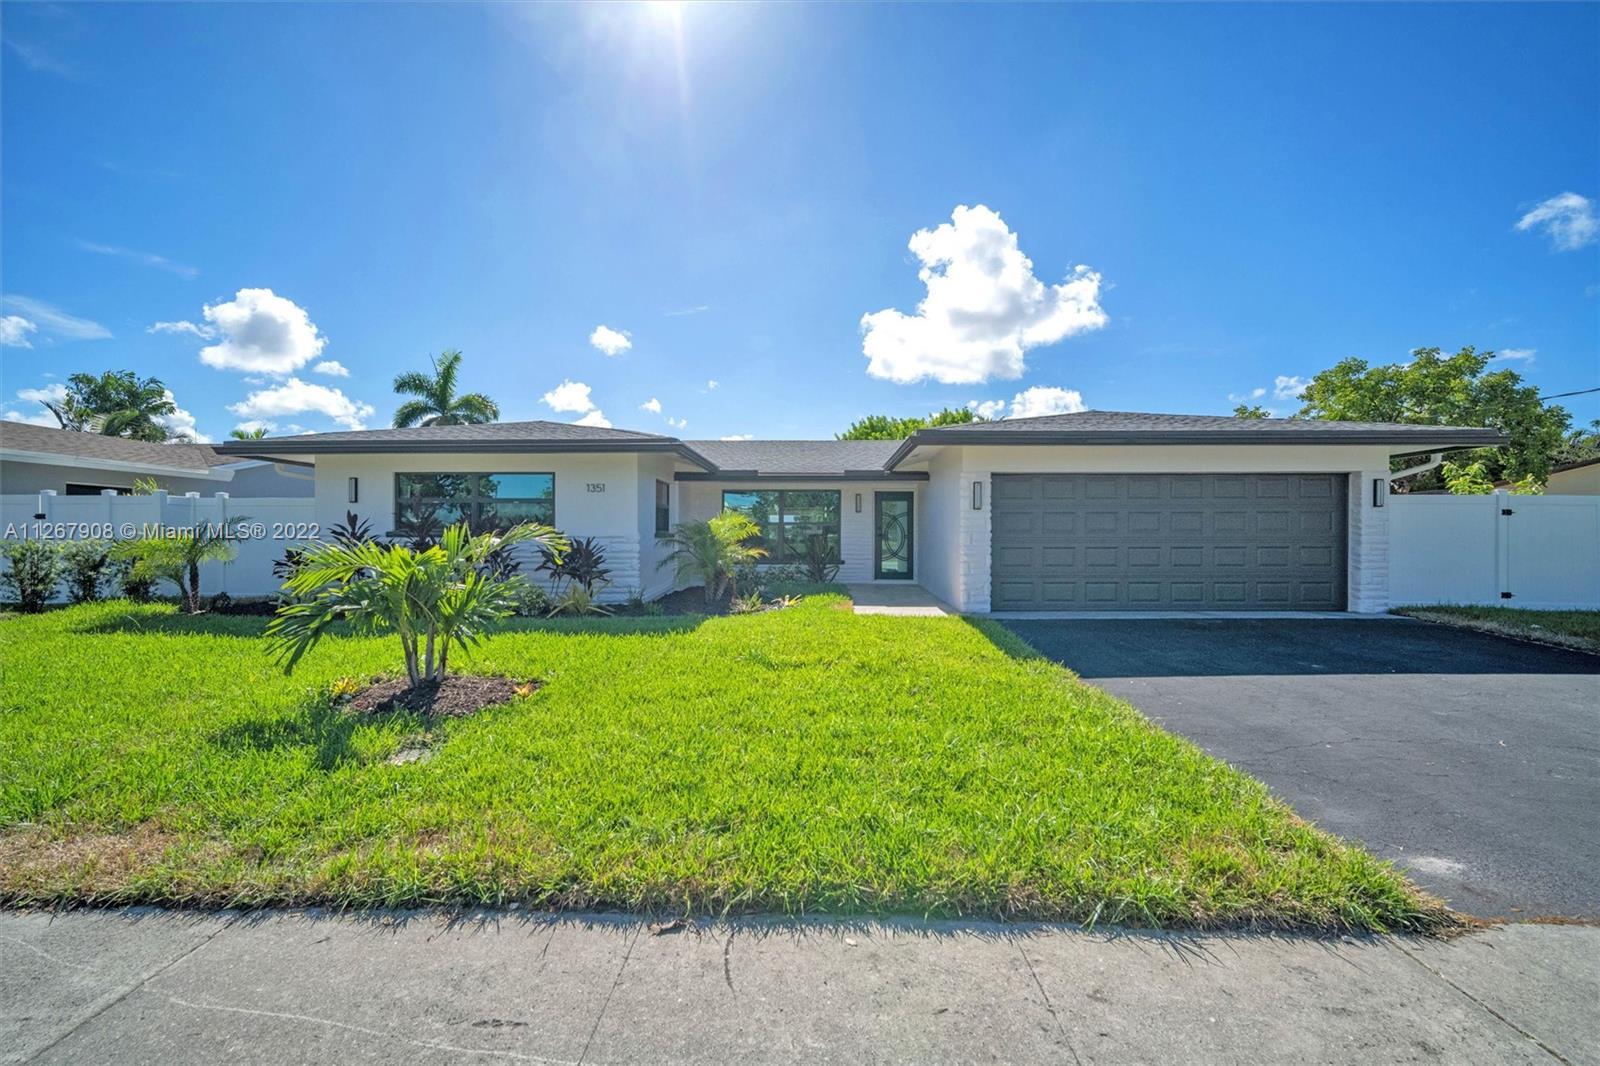 Luxurious and magnificent 4 beds, 2 baths waterfront pool home on a massive 12,000 SQ. FT. lot. Just